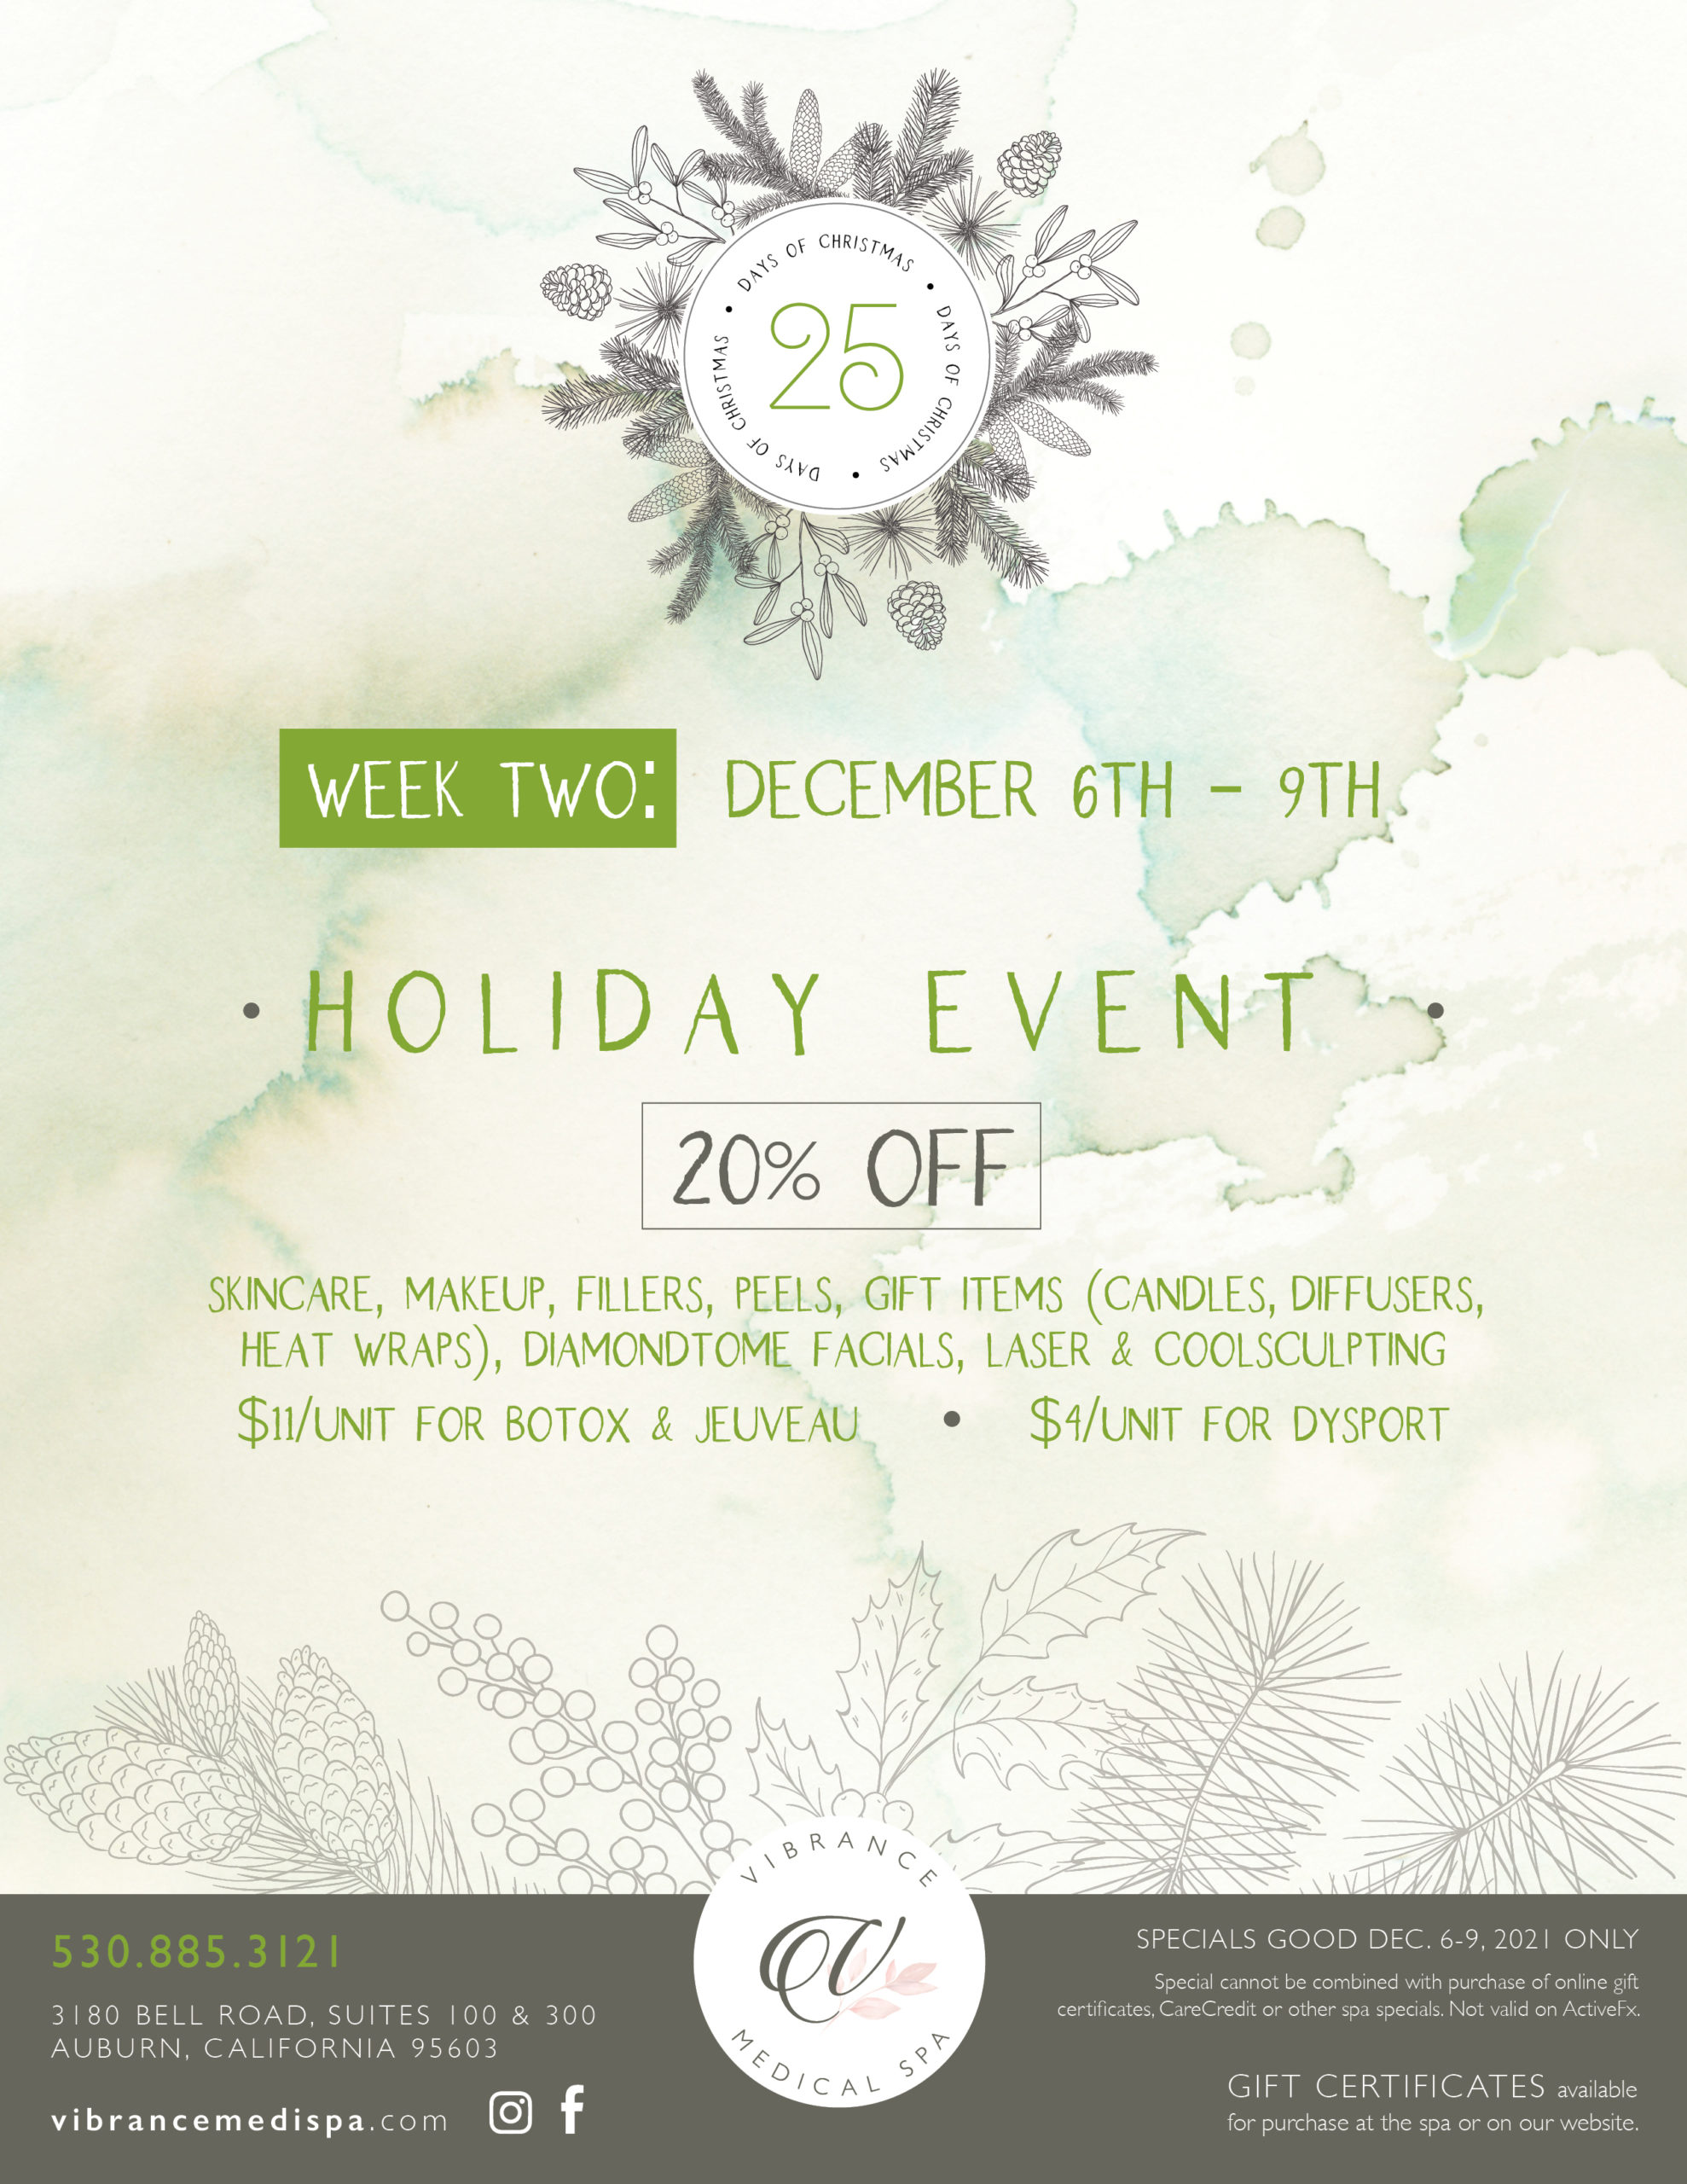 Week two: December 6th-9th holiday event